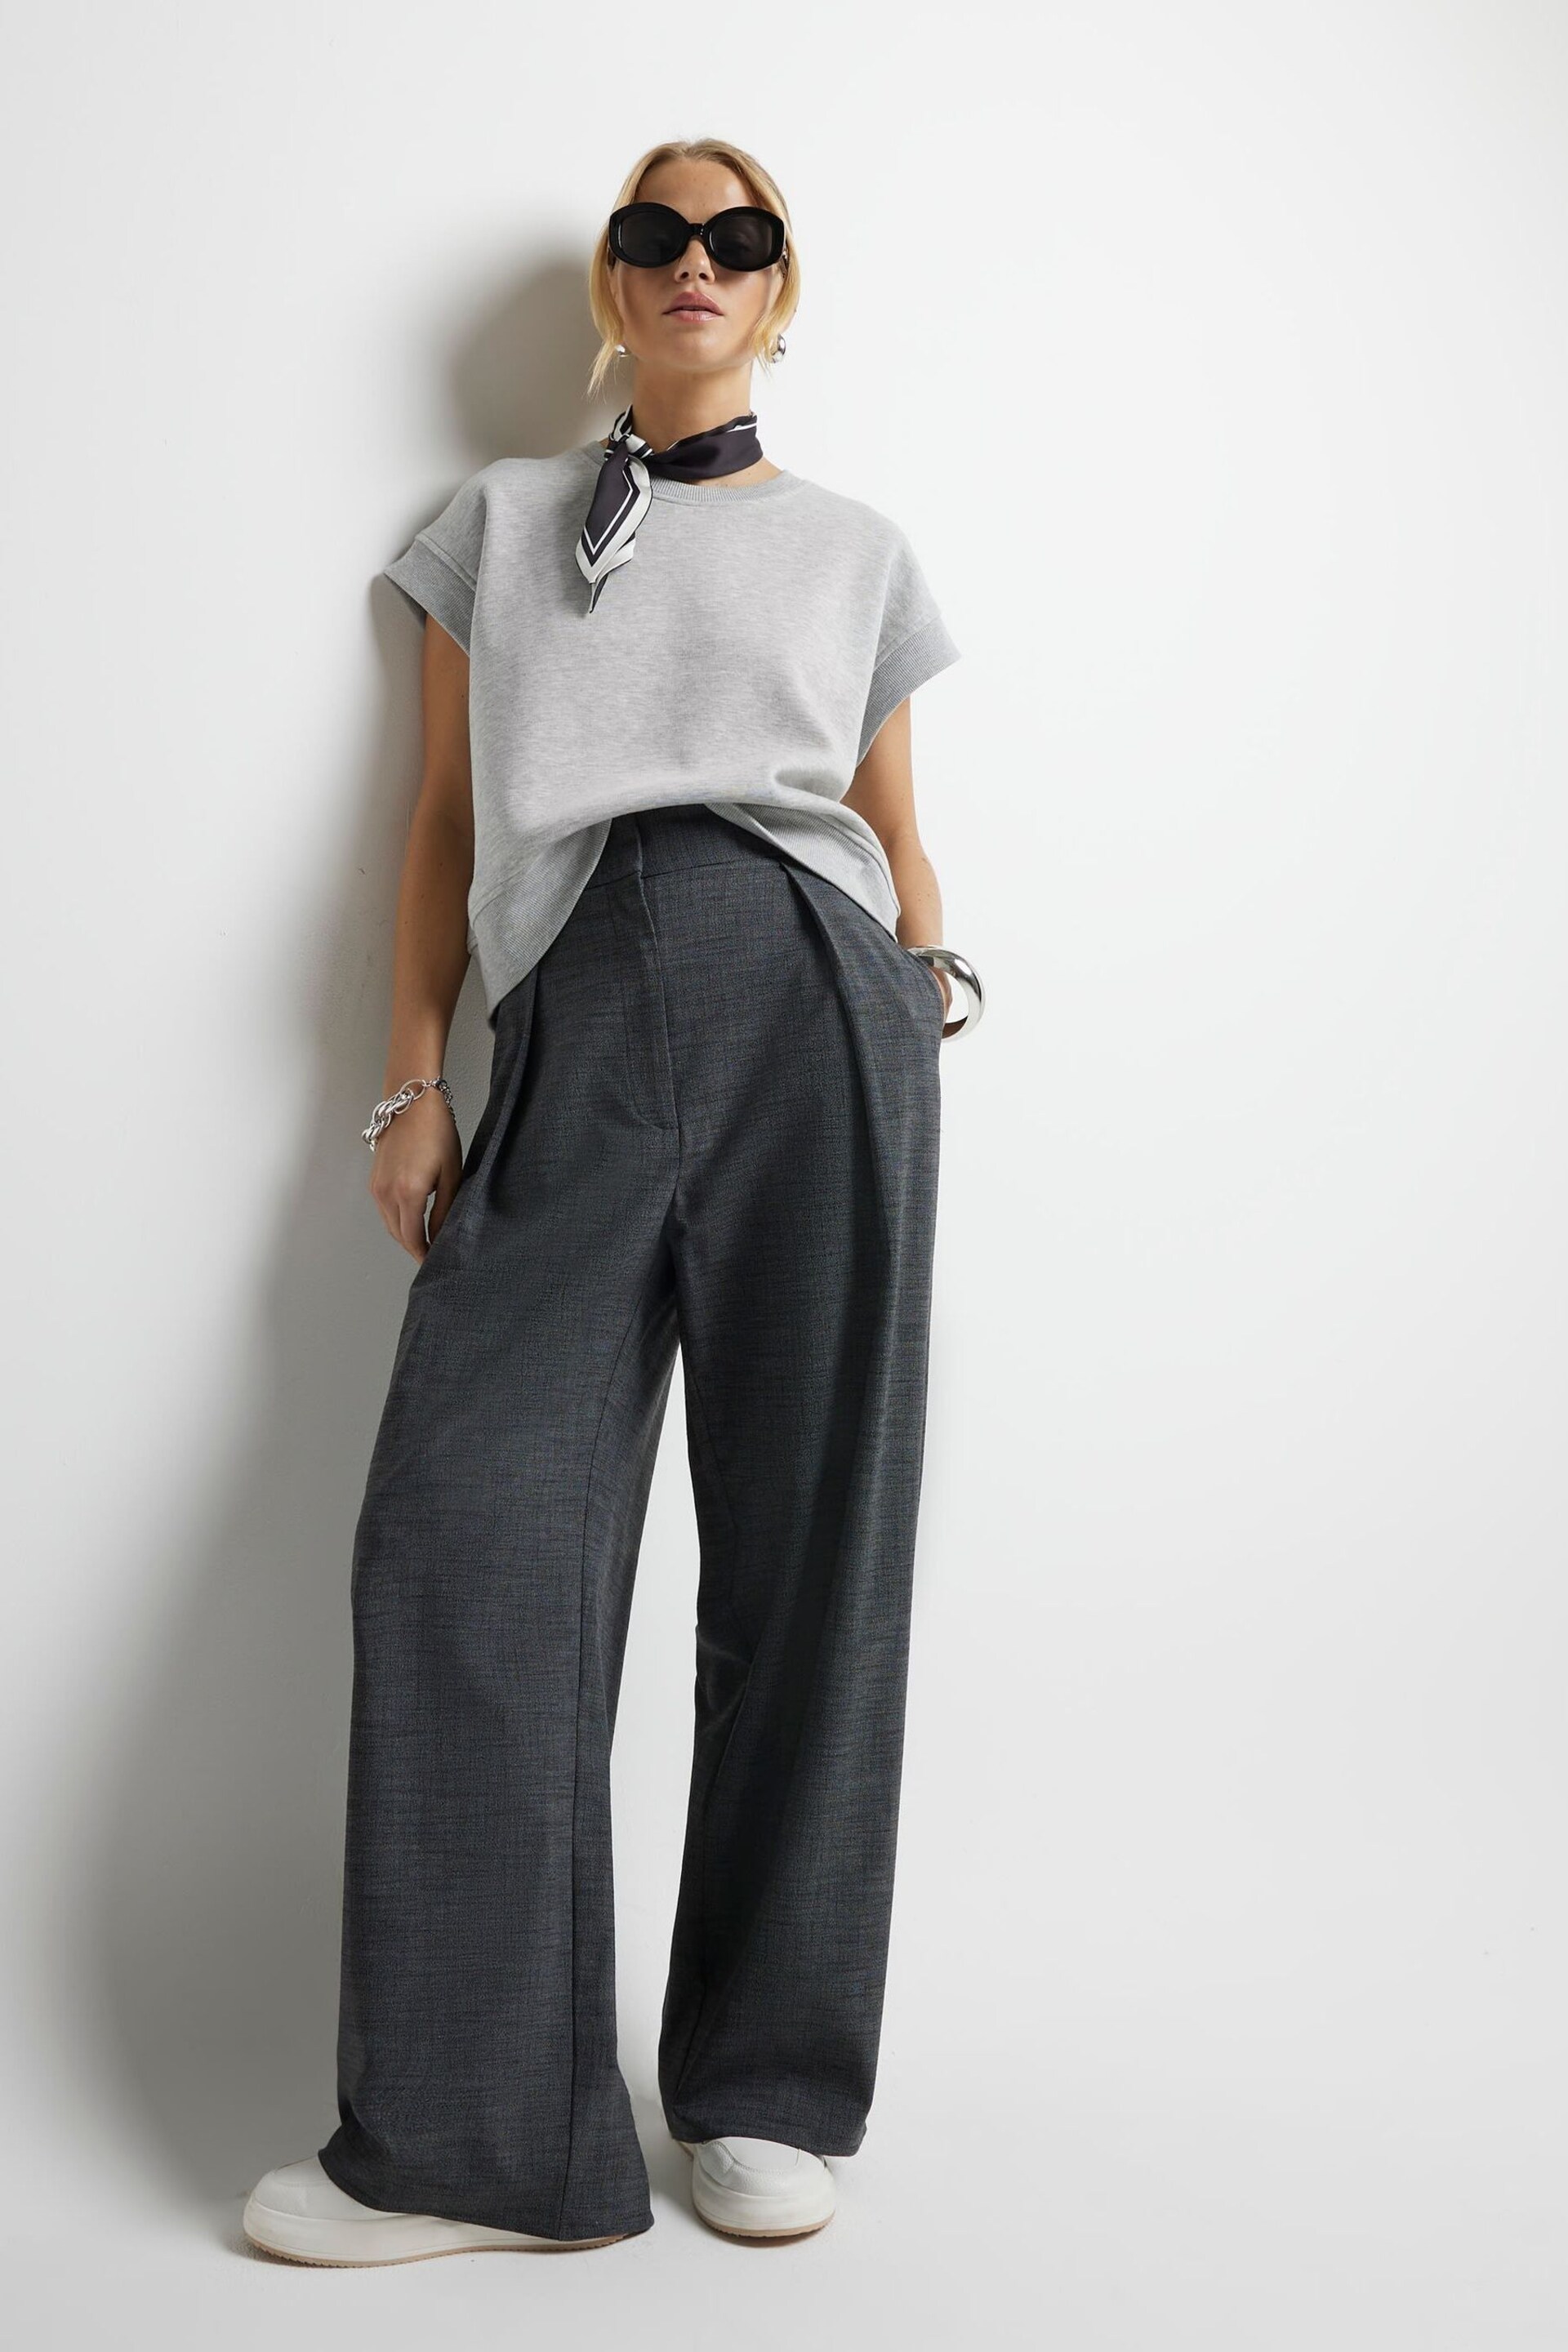 River Island Grey Wide Leg Pleated Clean Trousers - Image 1 of 6